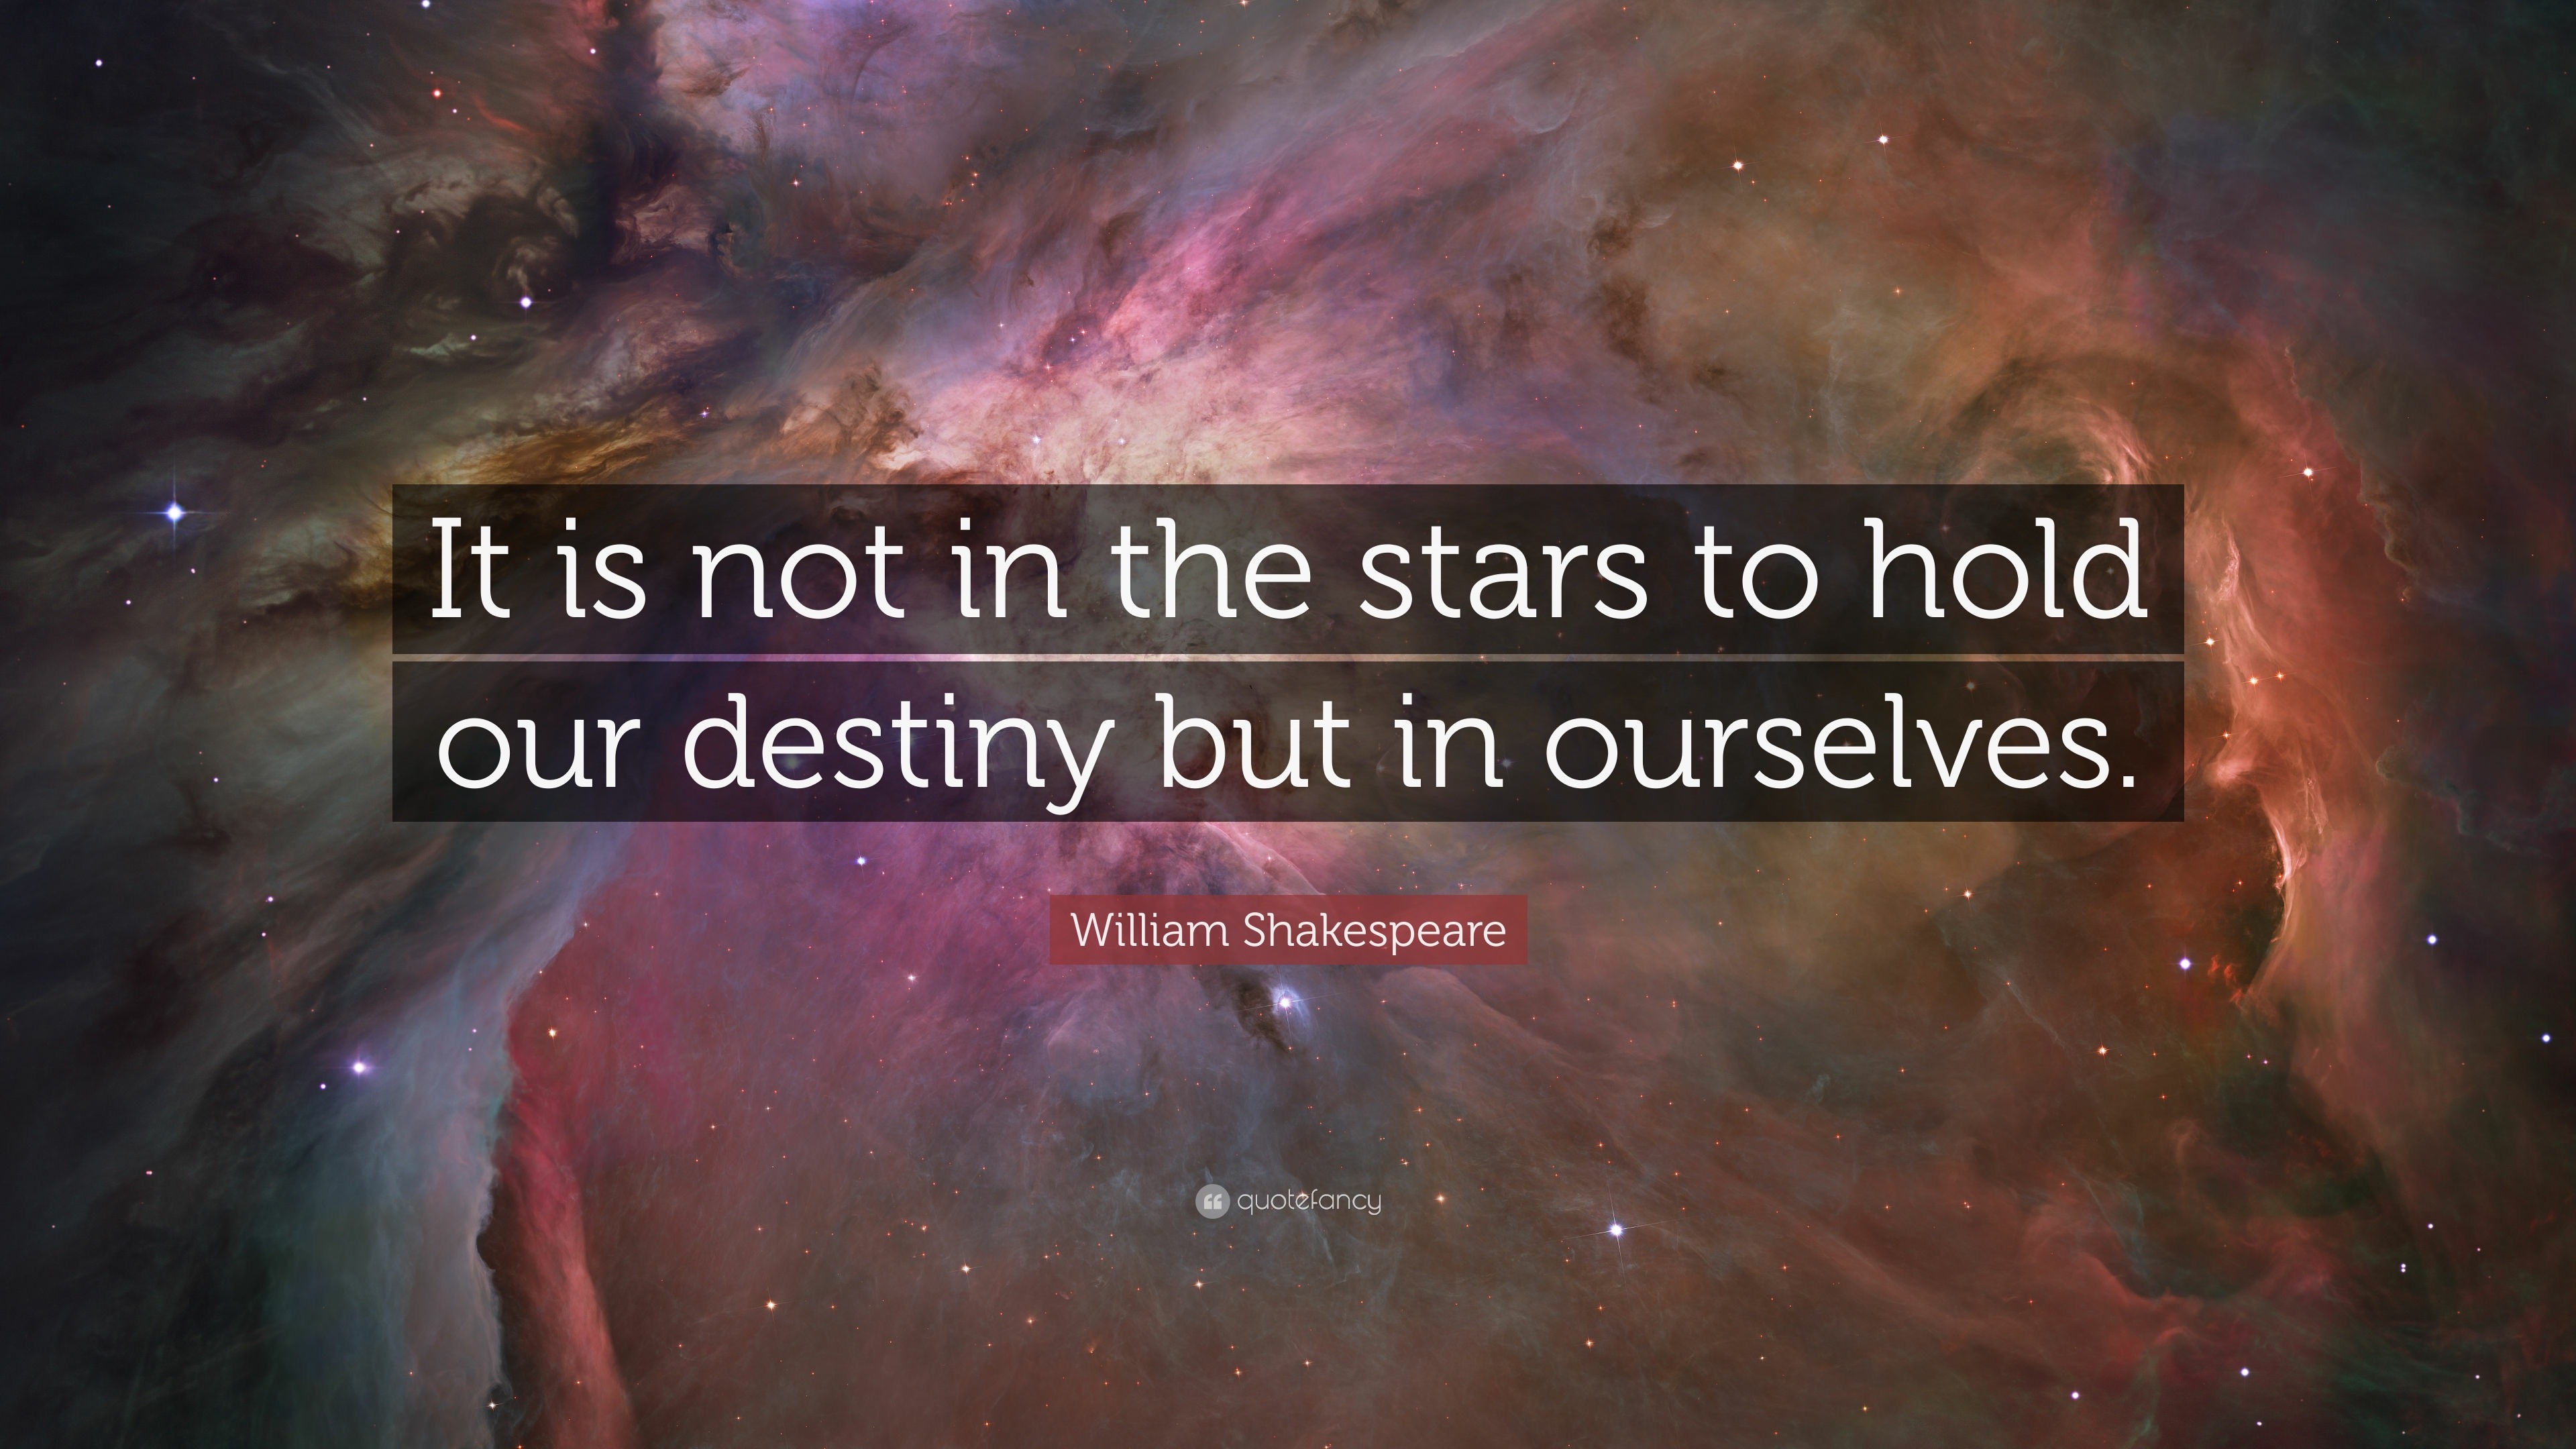 William Shakespeare Quote: “It is not in the stars to hold our destiny